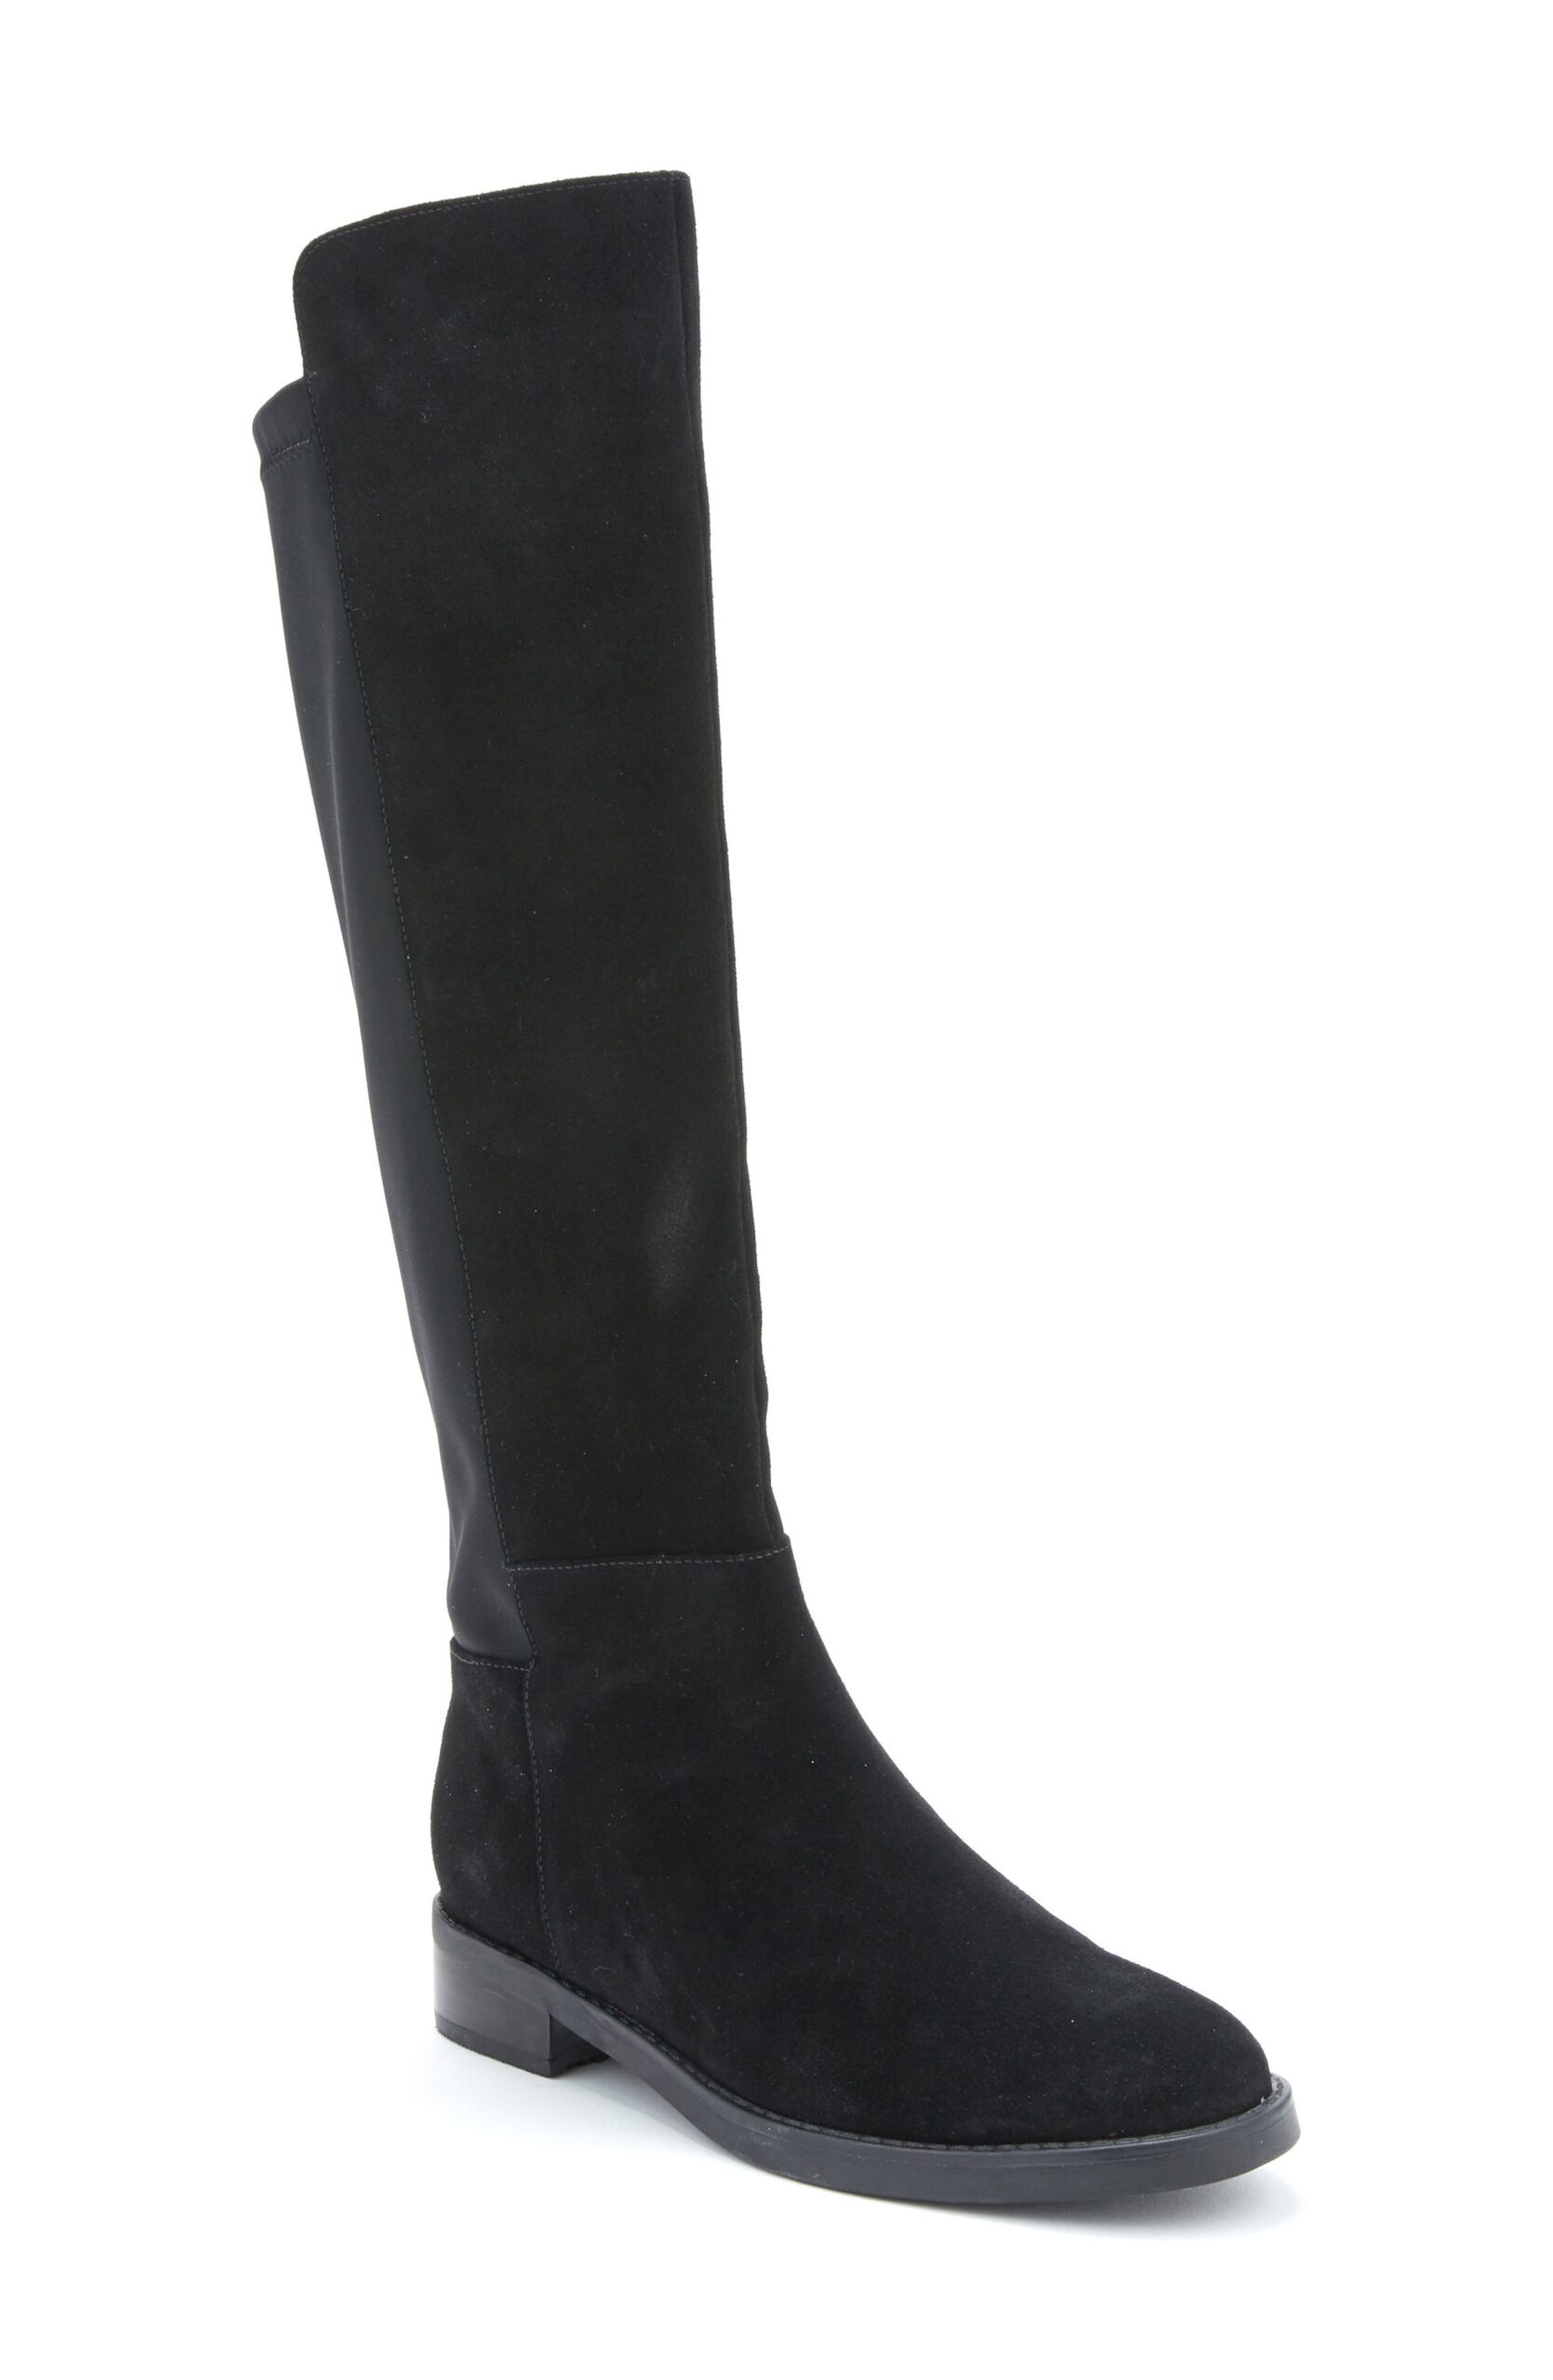 Black knee high boots: Rock this  Fall/winter trend